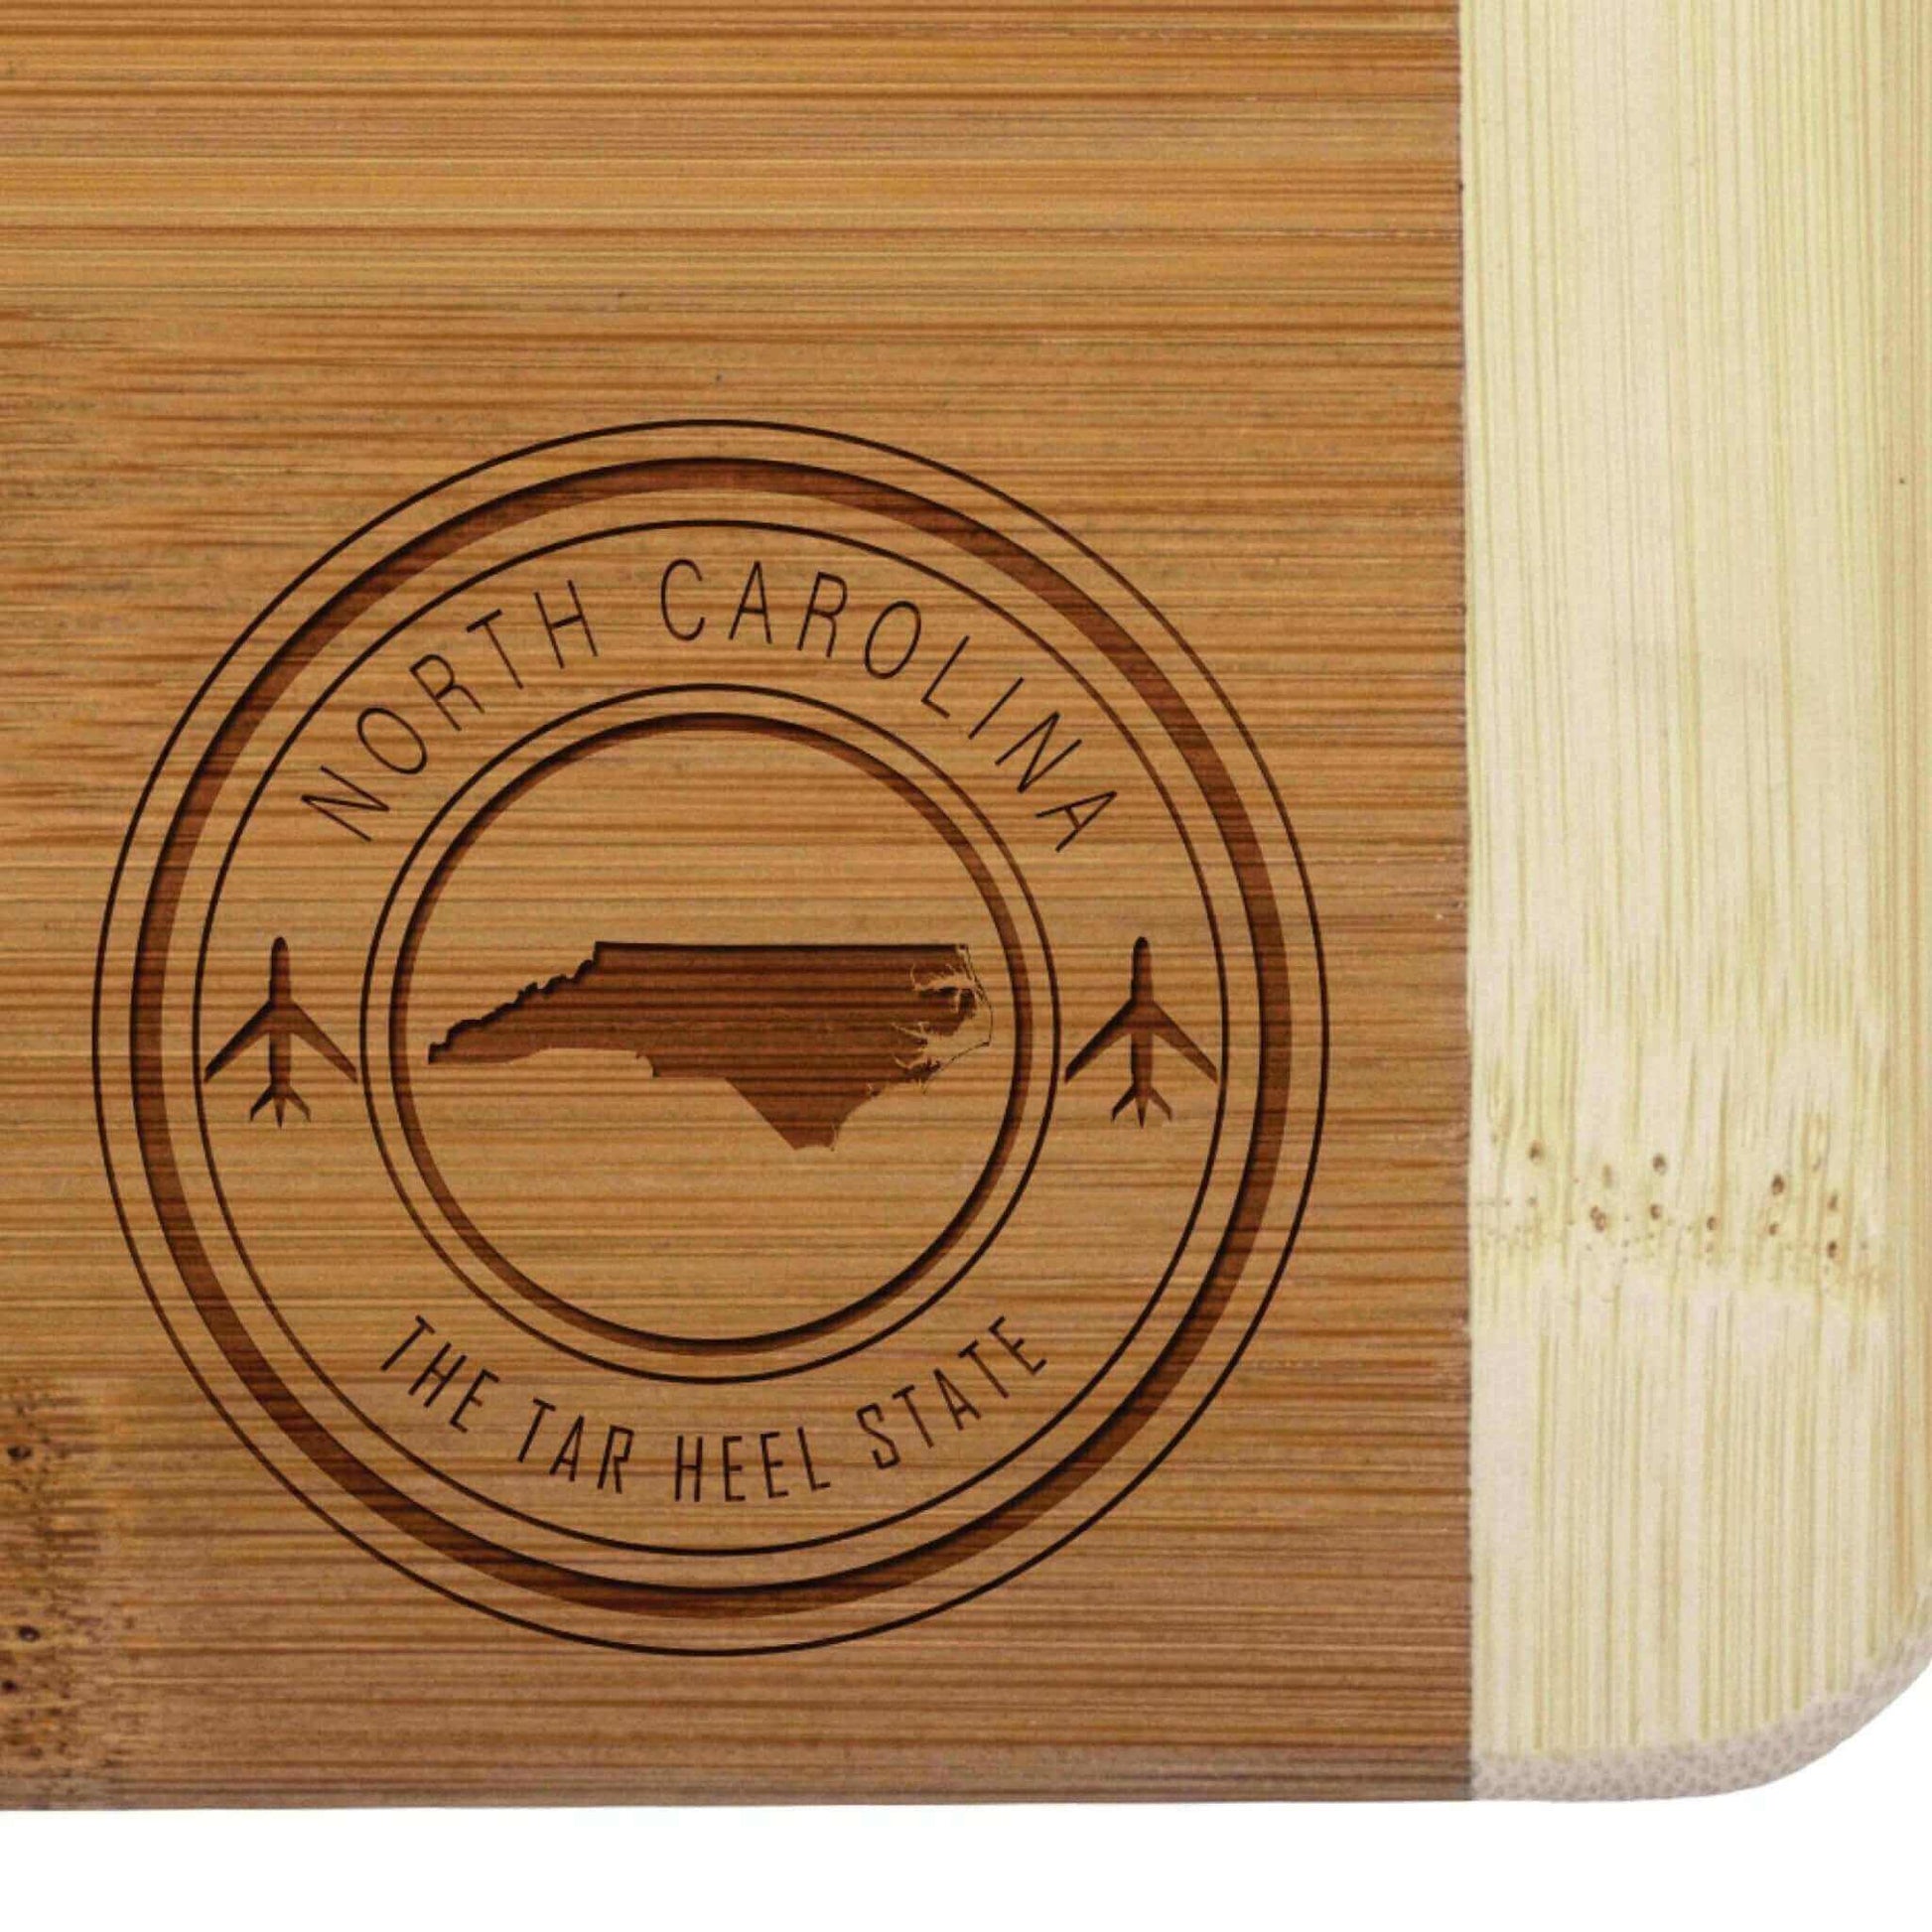 Compact North Carolina-themed wooden mini bar board with state outline and "The Tar Heel State" text, perfect for serving appetizers or displaying decor.